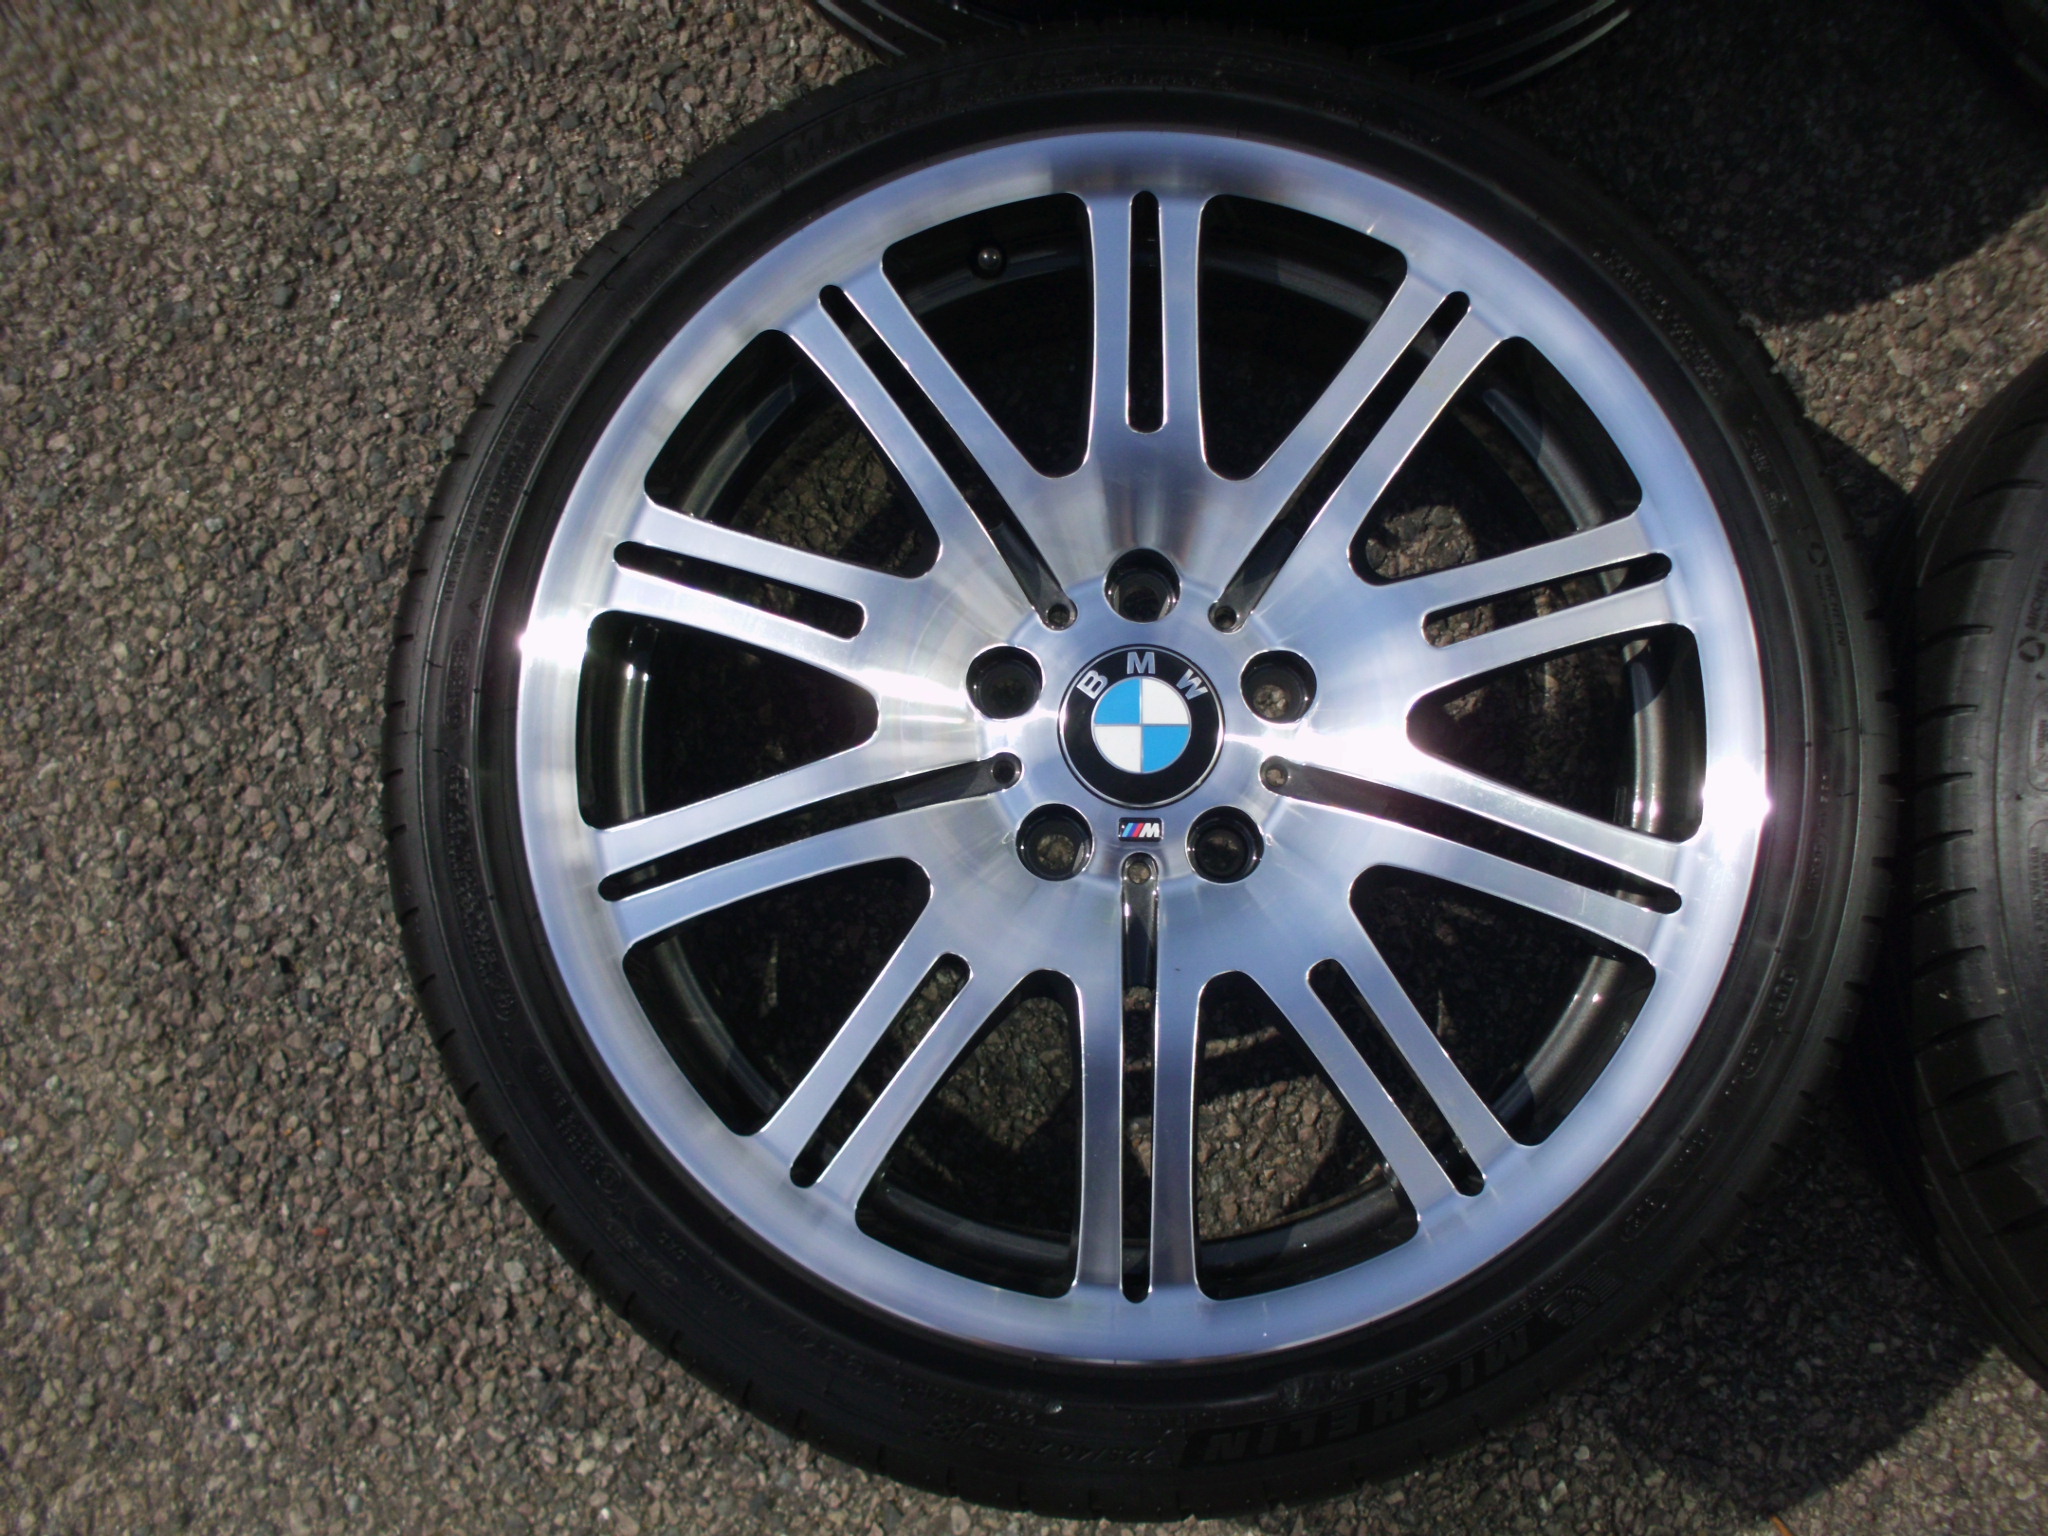 USED 19" GENUINE BMW FORGED STYLE 67M E46 M3 POLISHED ALLOYS,WIDE REAR,FULLY REFURBED INC EXCELLENT TYRES